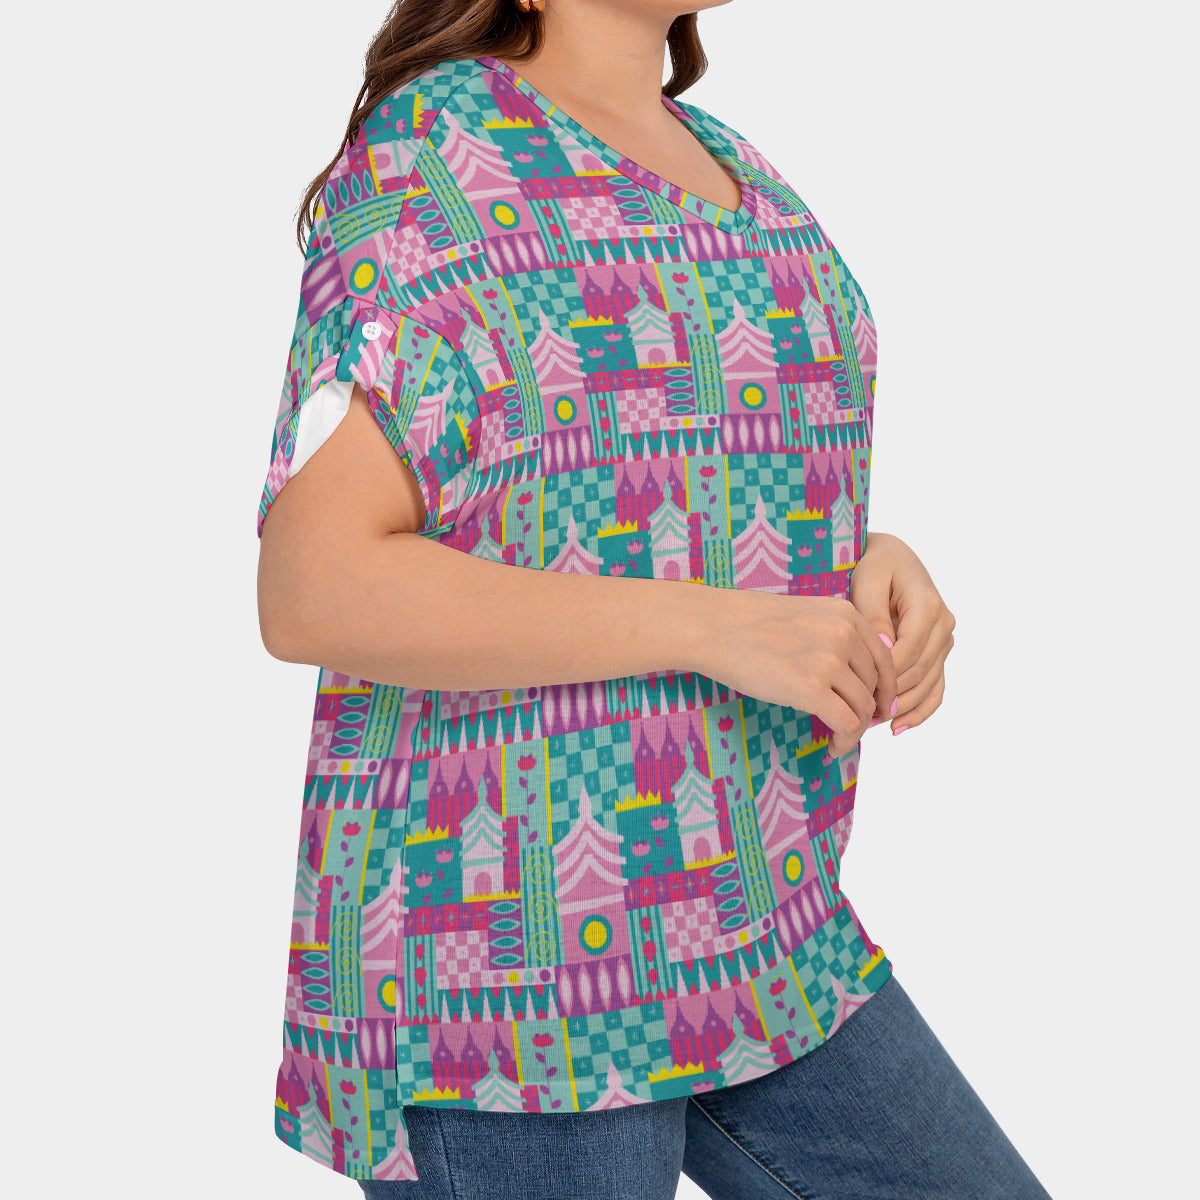 Small World Women's Plus Size Short Sleeve T-shirt With Sleeve Loops